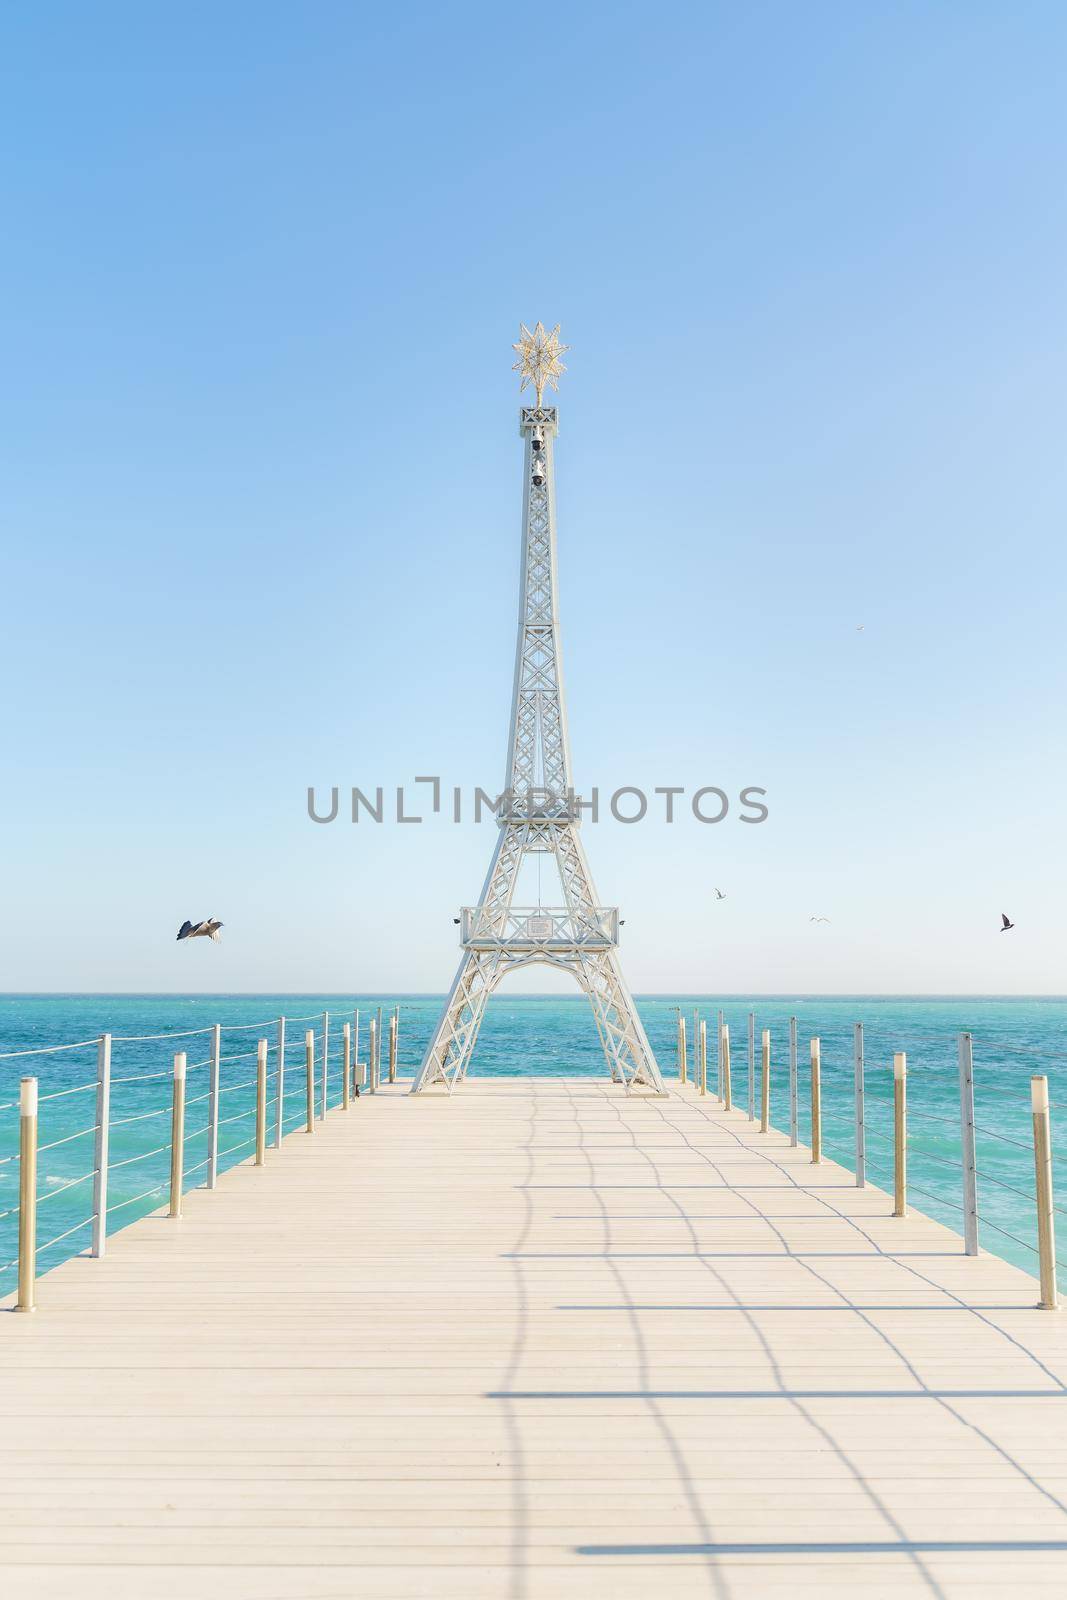 Large model of the Eiffel Tower on the beach. by Matiunina